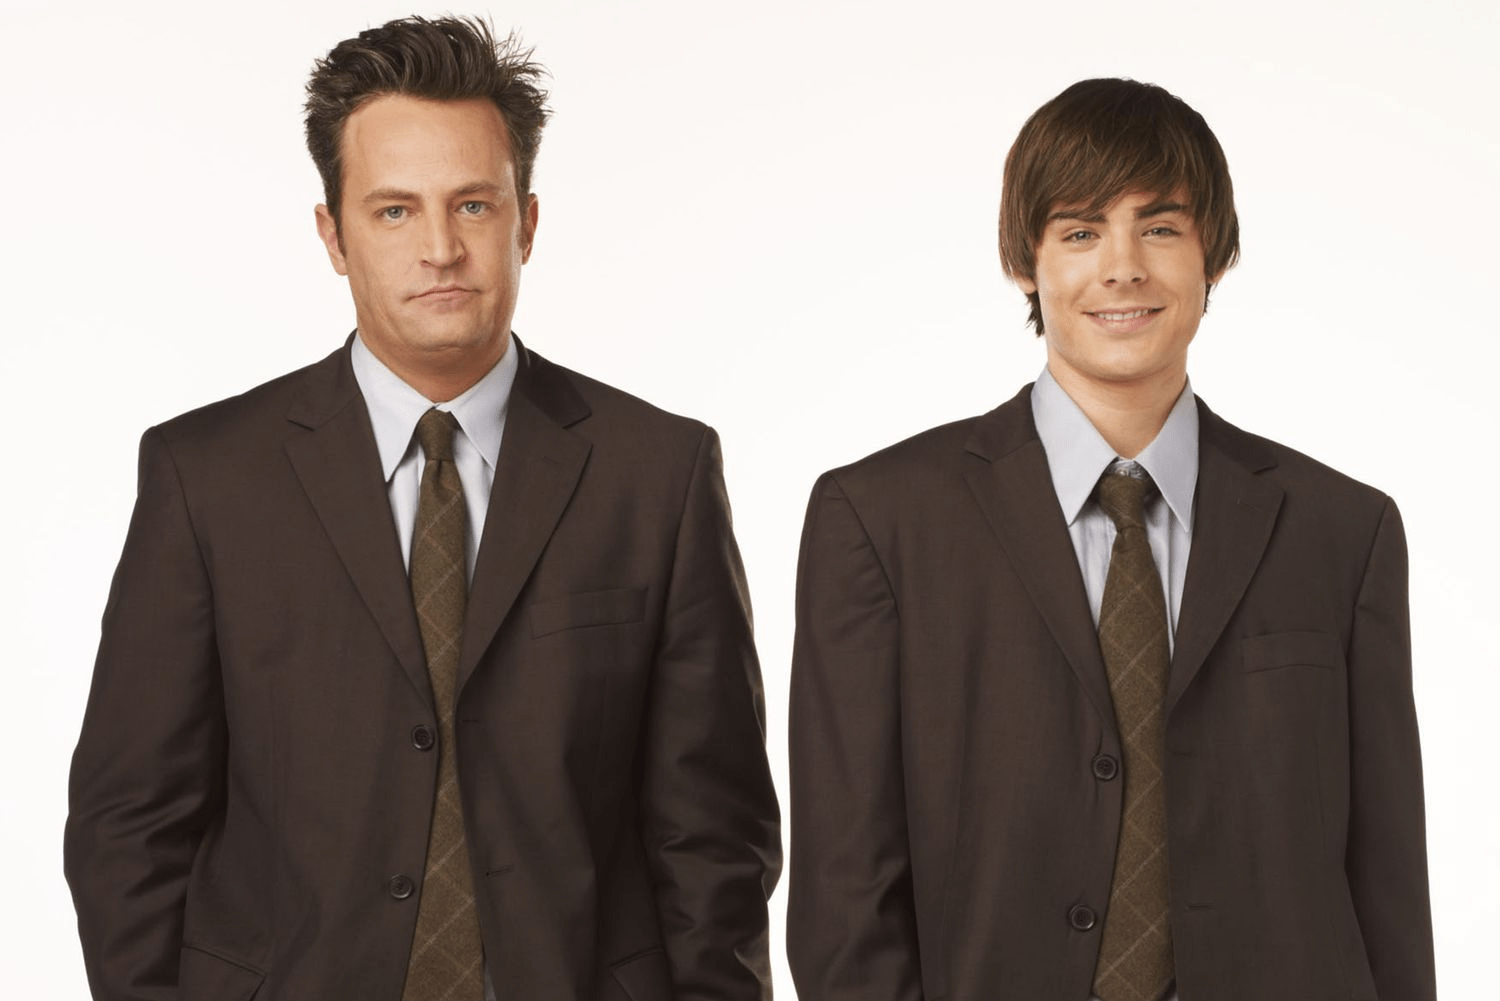 Zac Efron Says He Would Be ‘Honored’ to Play Matthew Perry in a Biopic